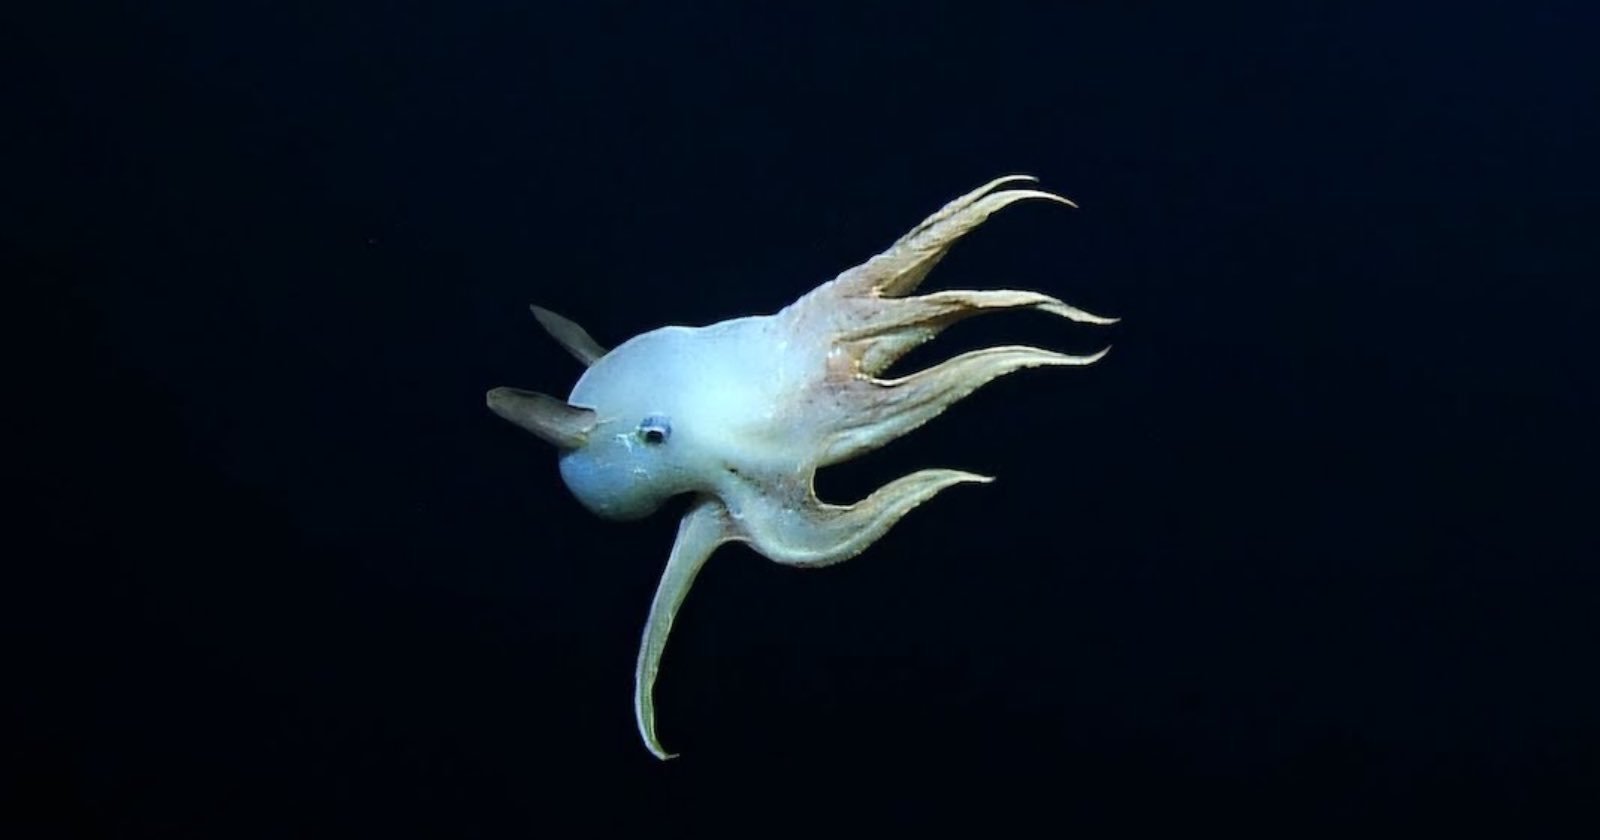 Rare Dumbo Octopus Spotted Live on Camera During Deep Sea Expedition